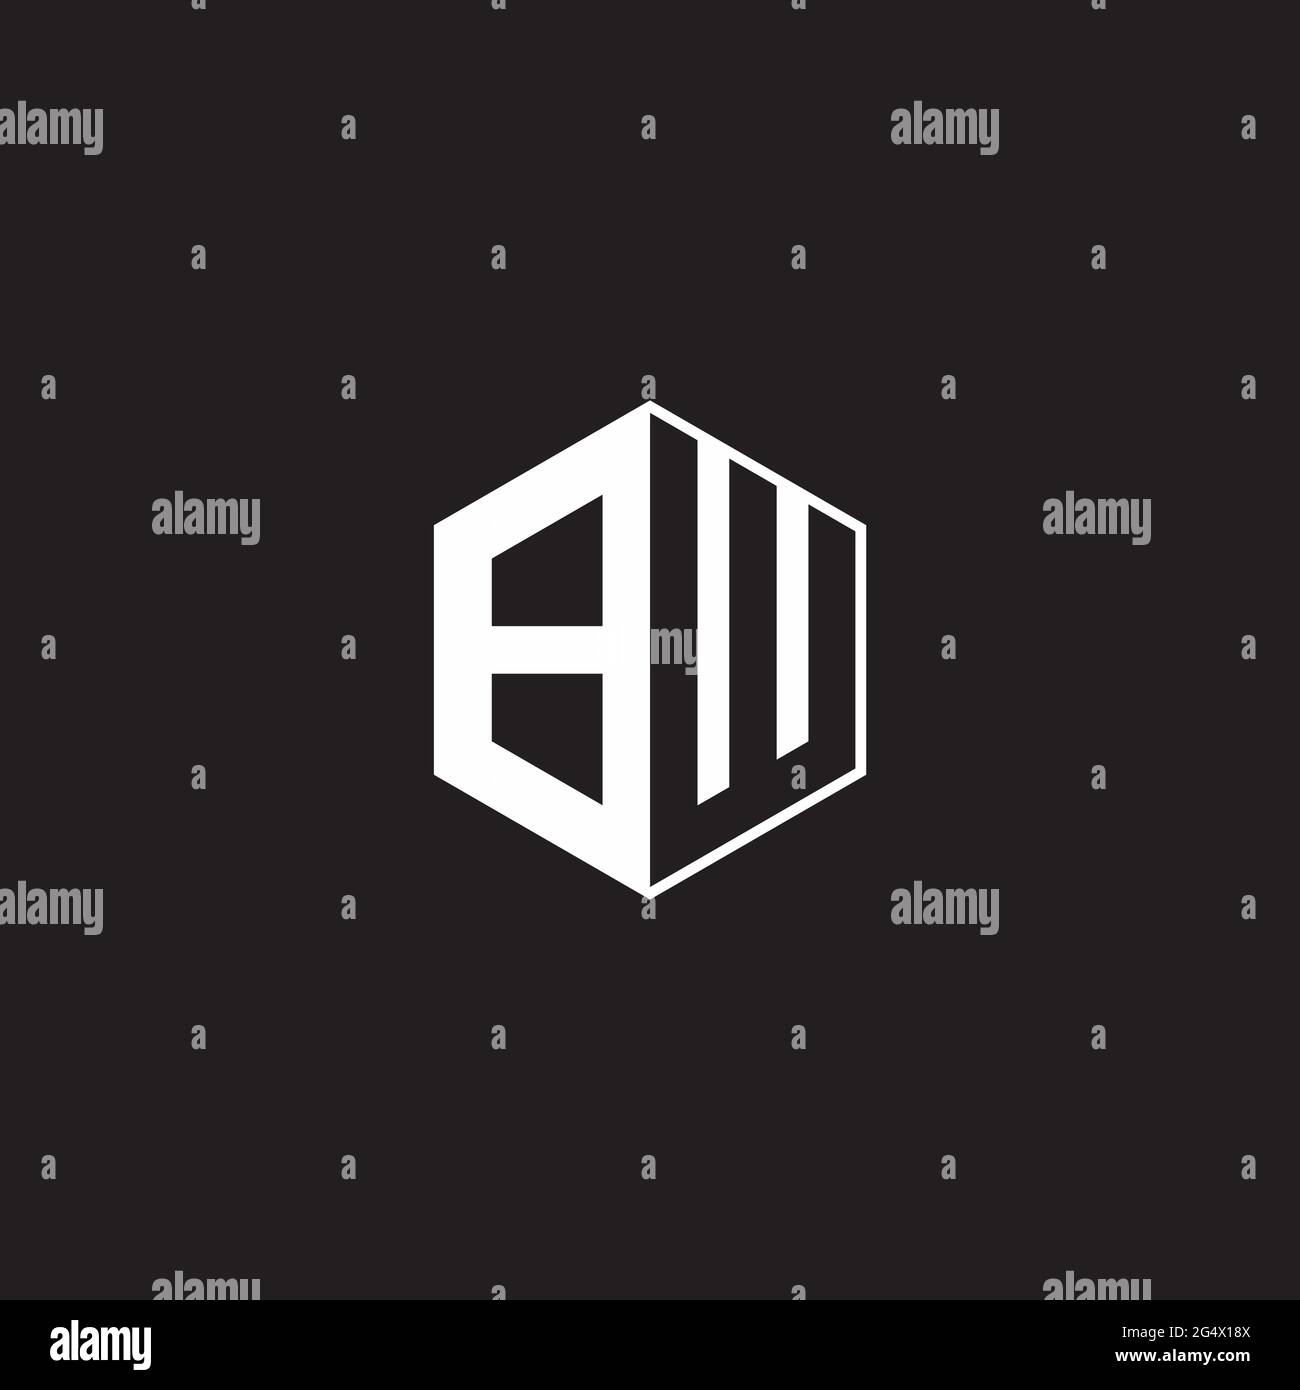 BW B W WB Logo monogram hexagon with black background negative space style Stock Vector